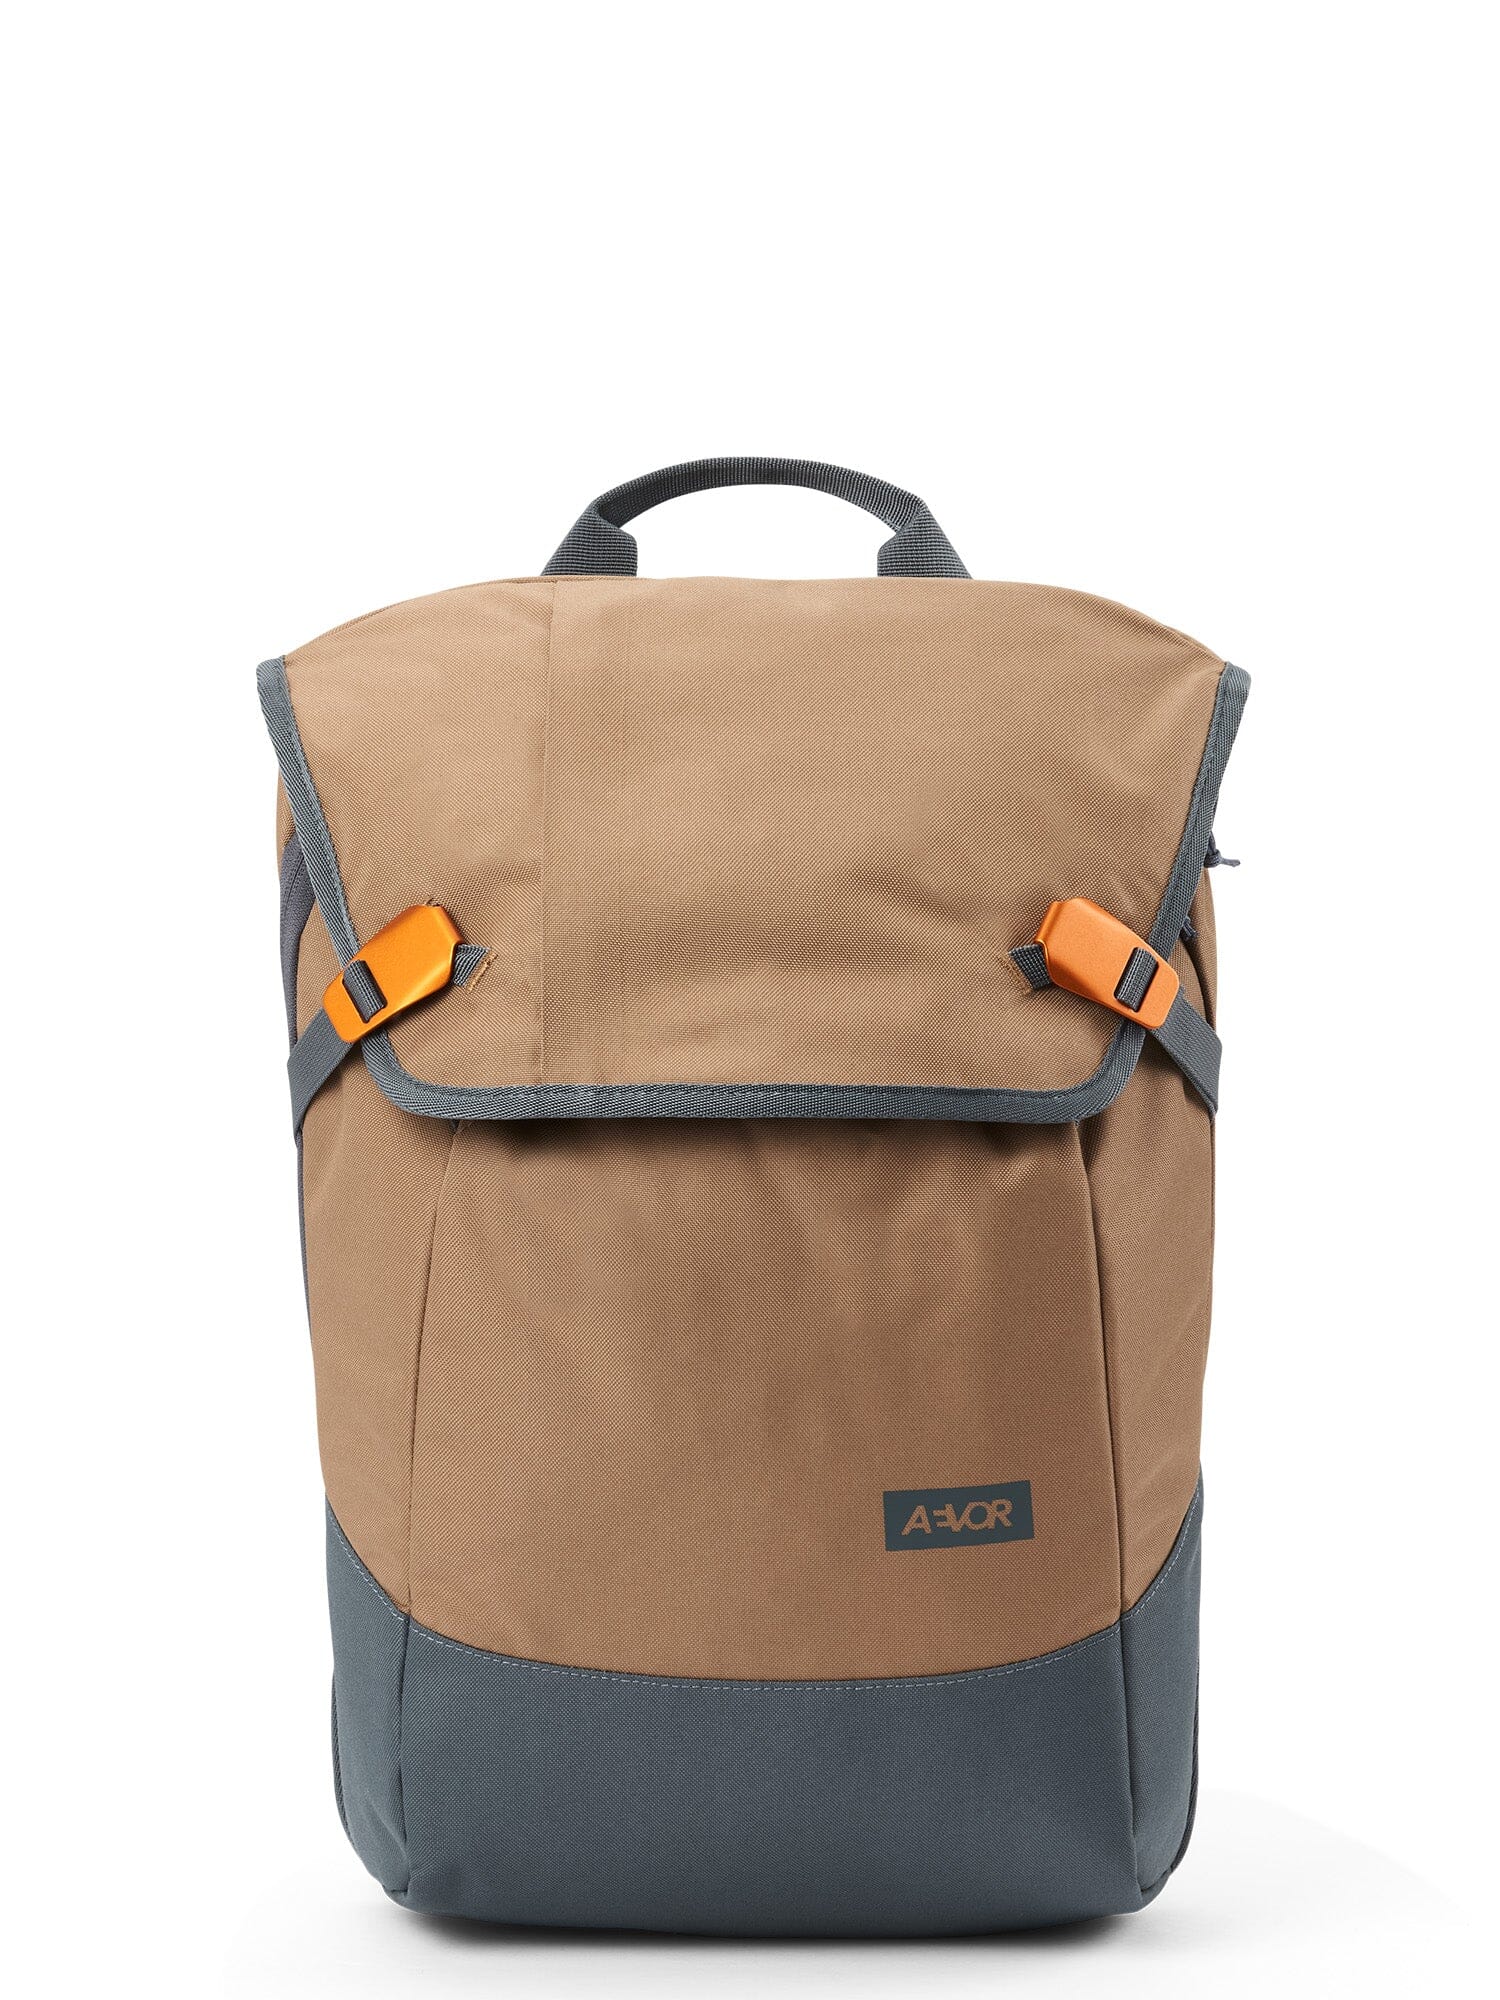 Aevor Daypack Backpack - Made from Recycled PET-bottles California Hike Bags